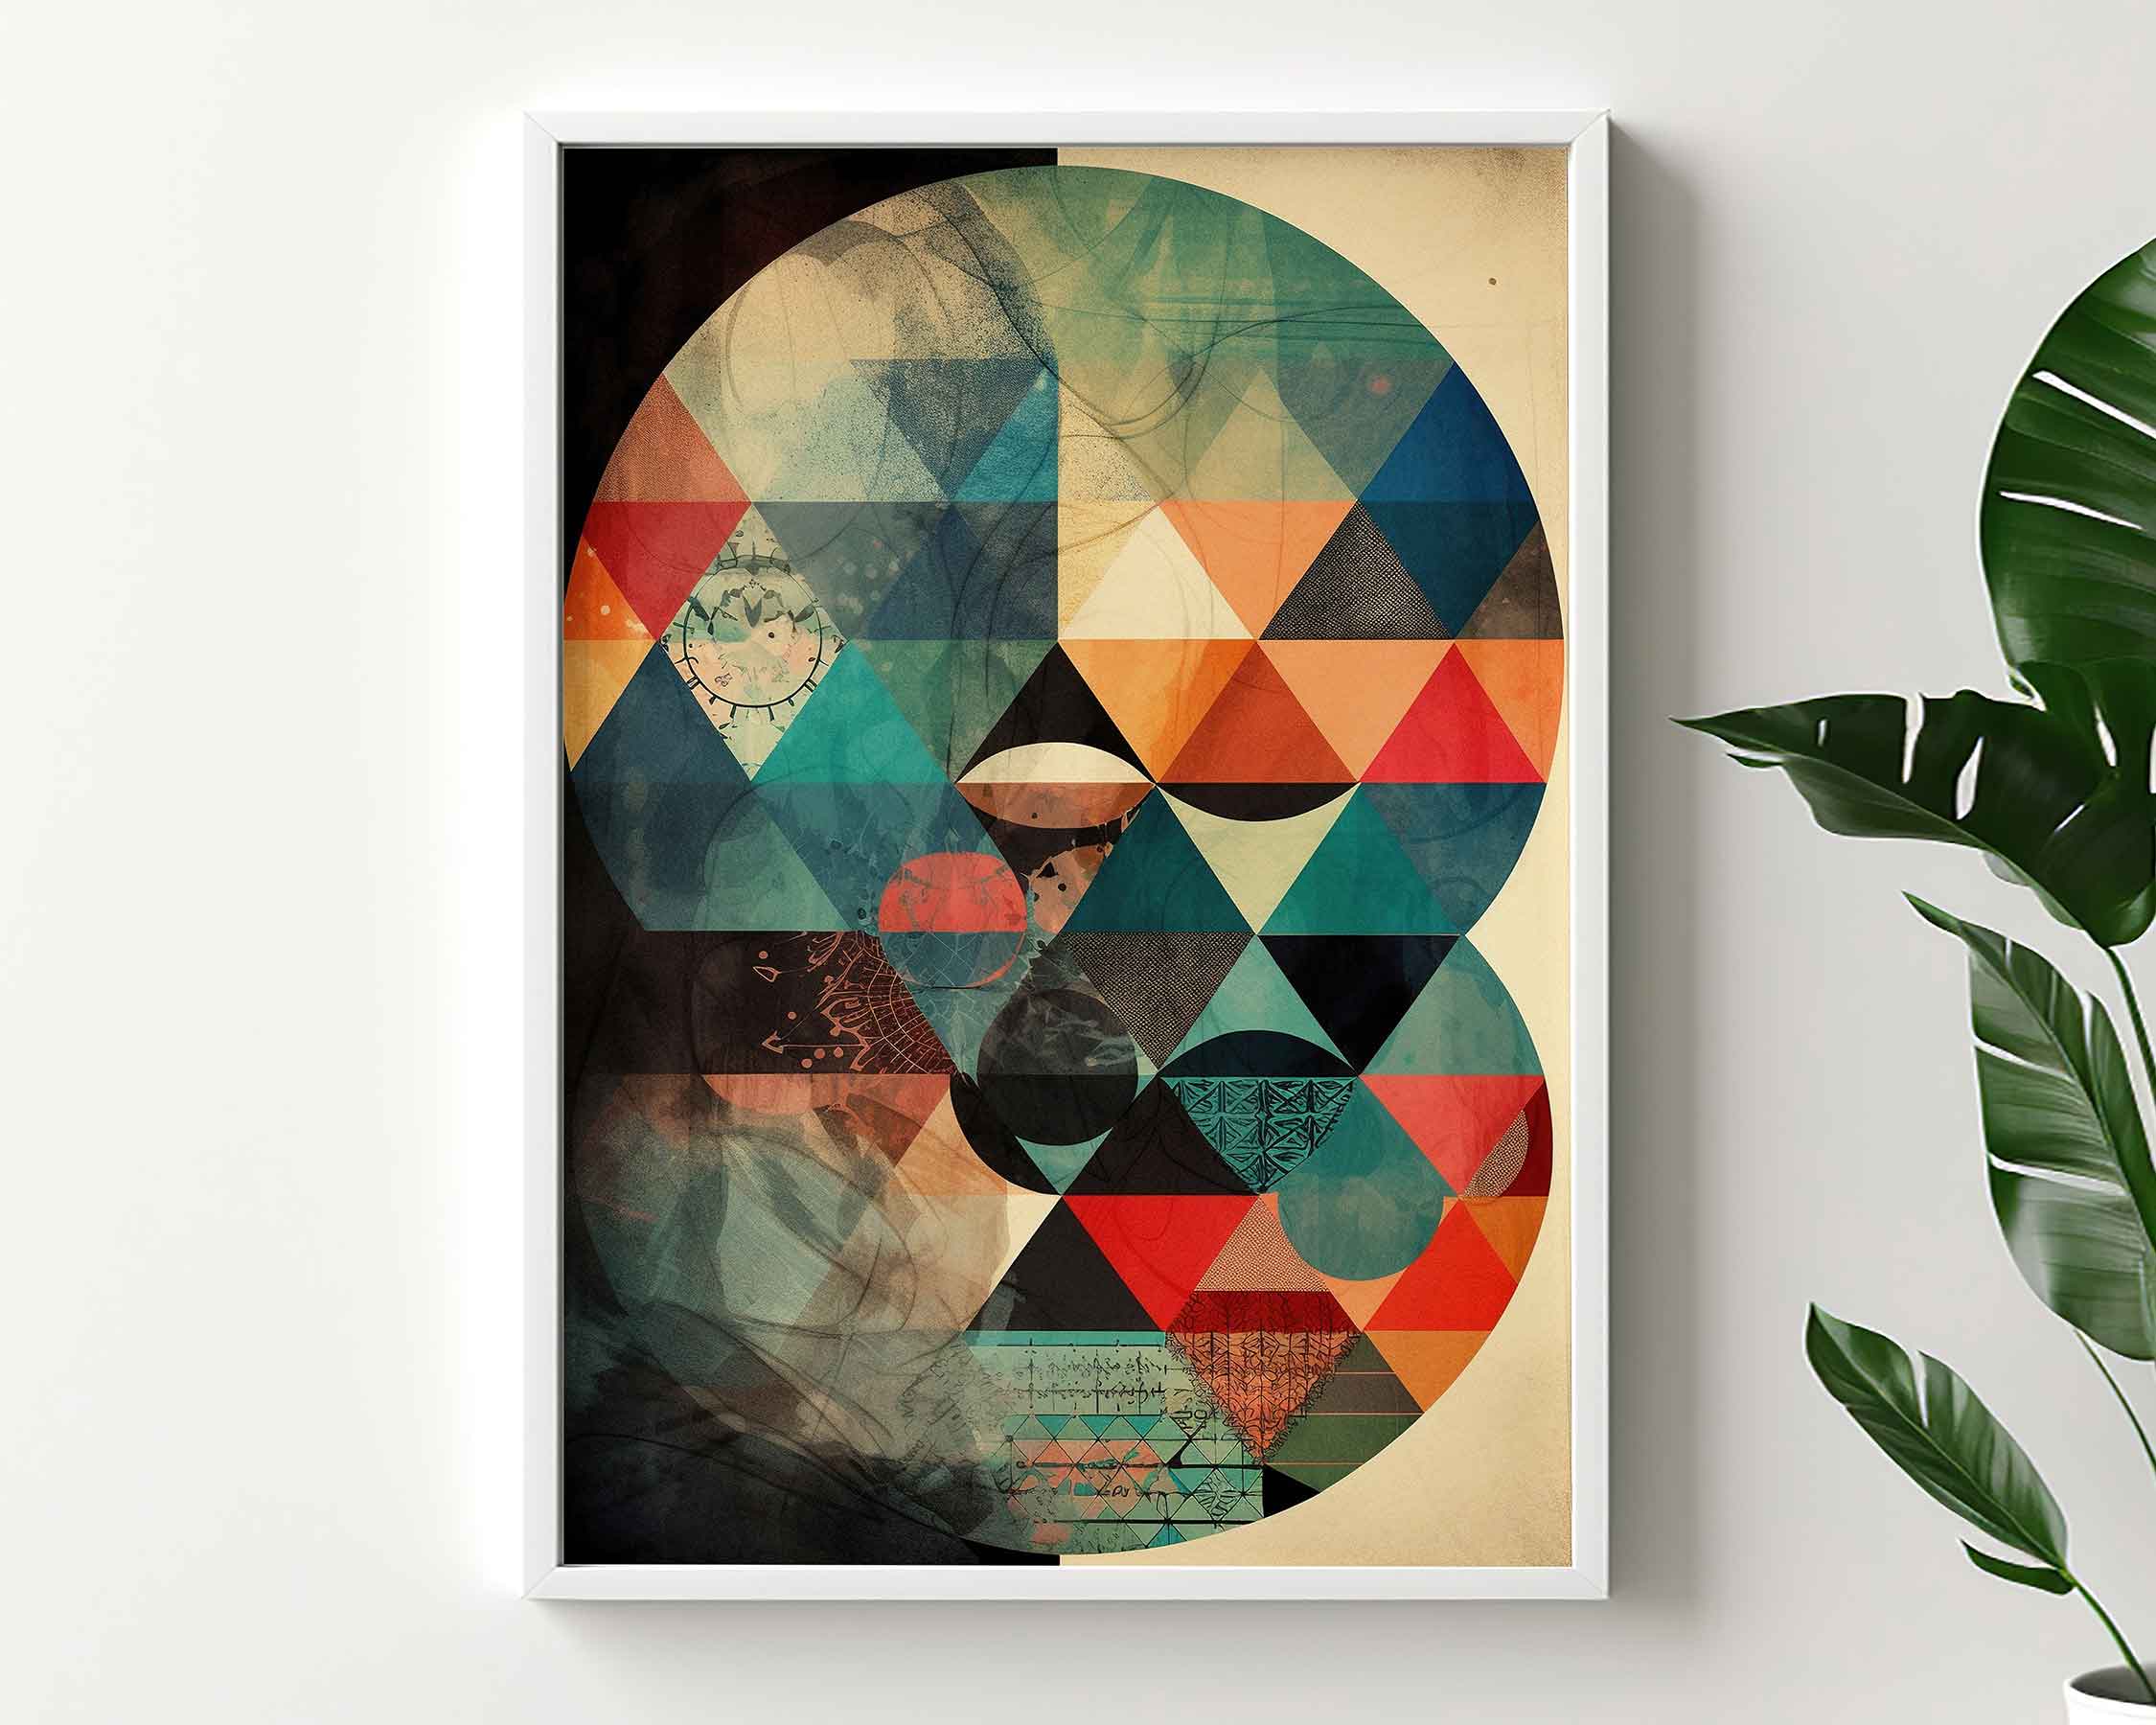 Framed Image of Boho Abstract Tribal Aztec Geometric Style Wall Art Poster Prints